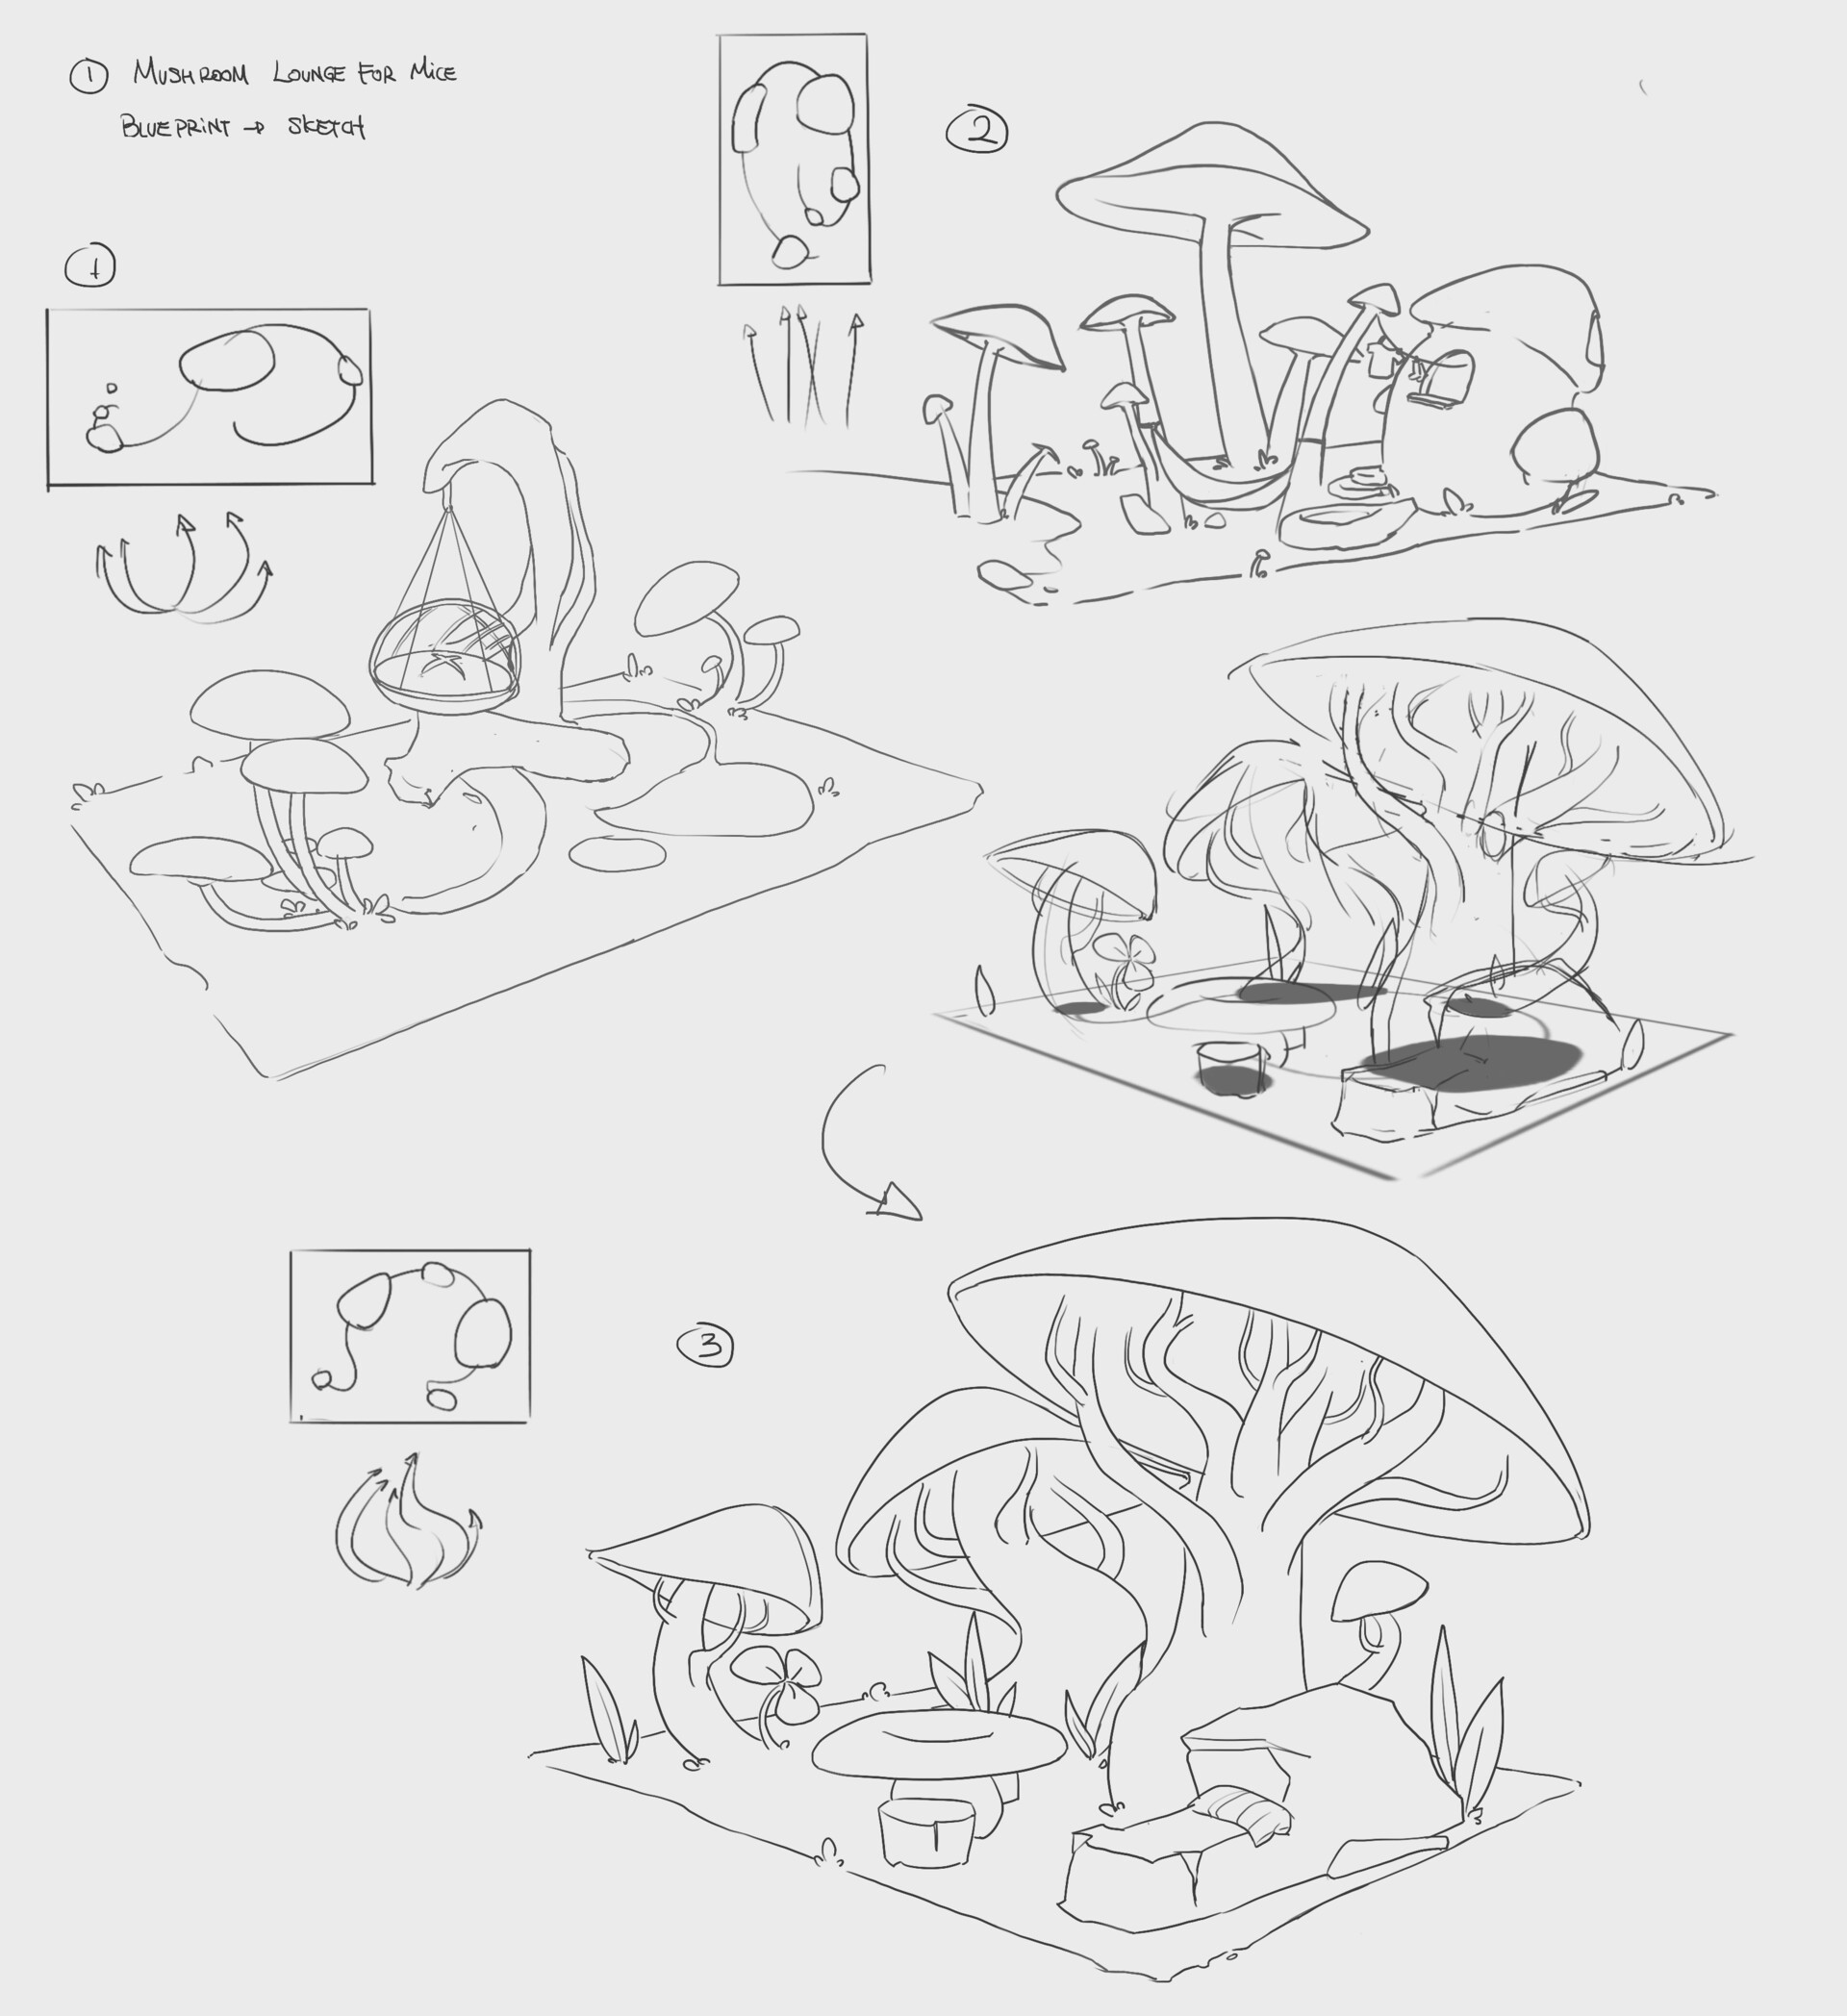 Sketch iterations of the mushroom lounge